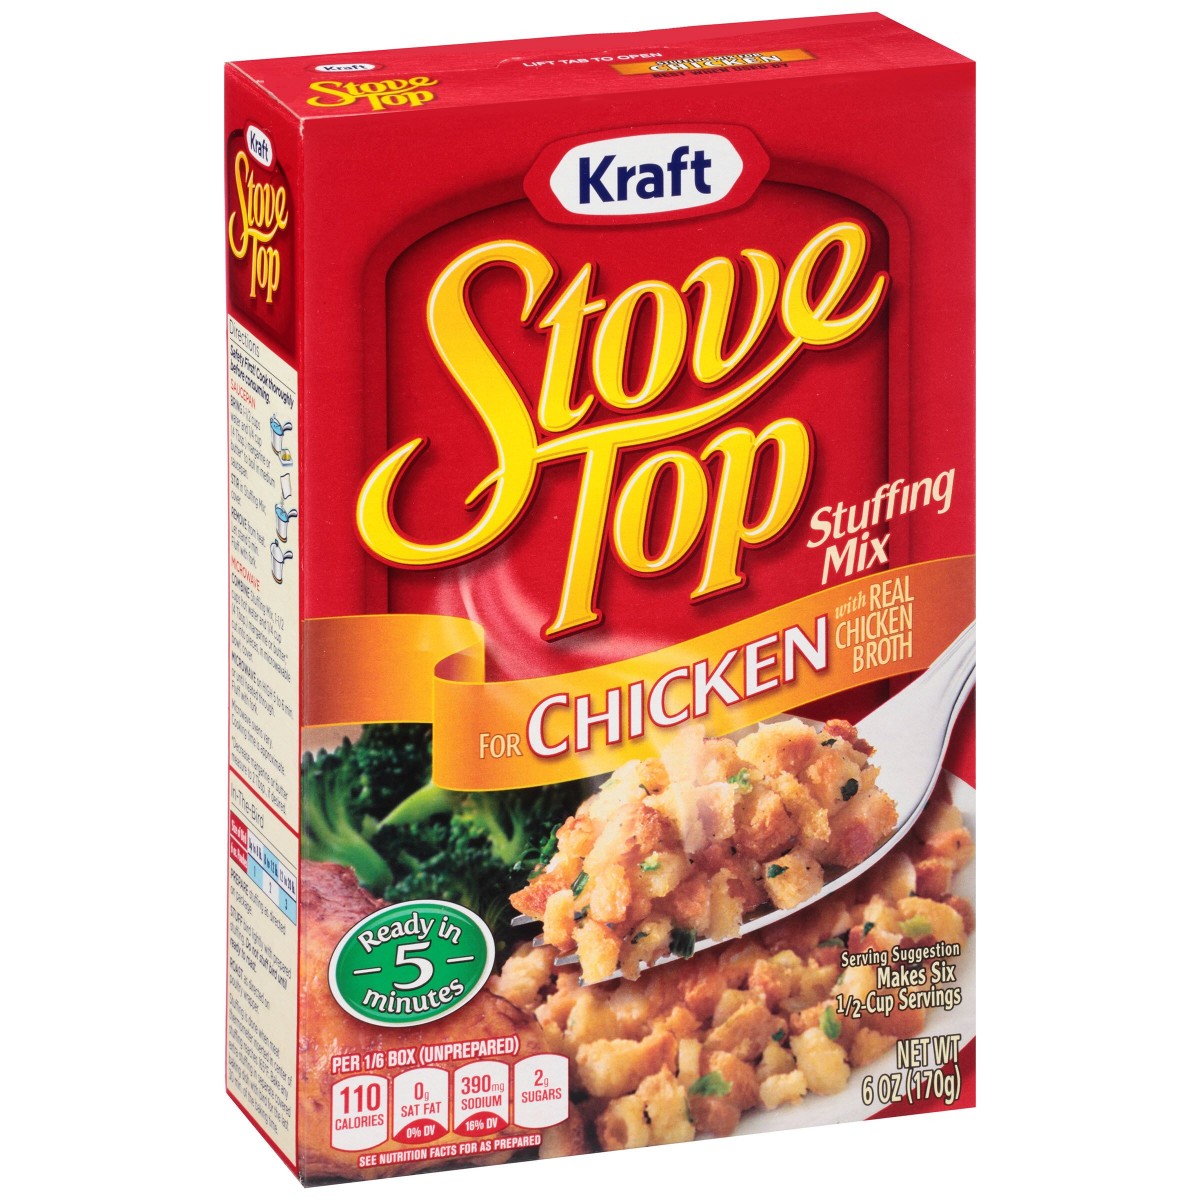 Stove Top Stuffing Chicken, 6oz